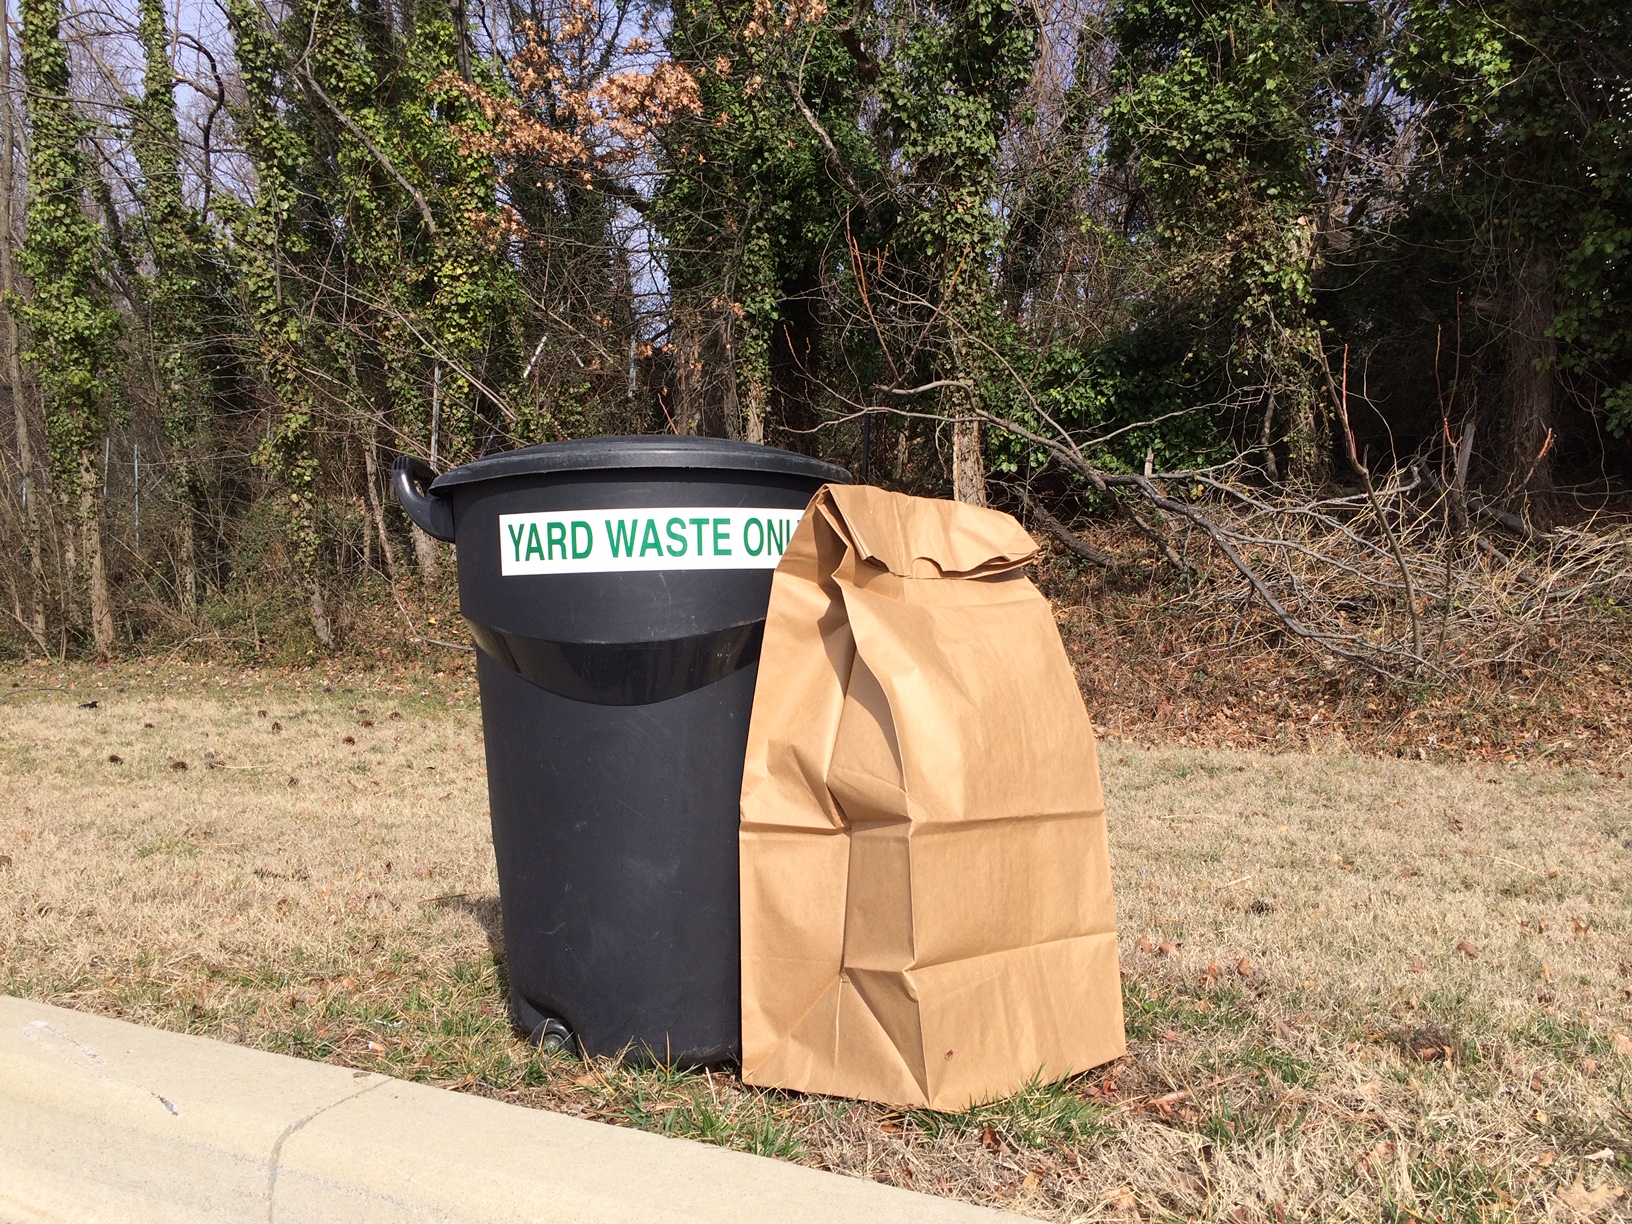 Yard waste container and paper bag for yard waste collections